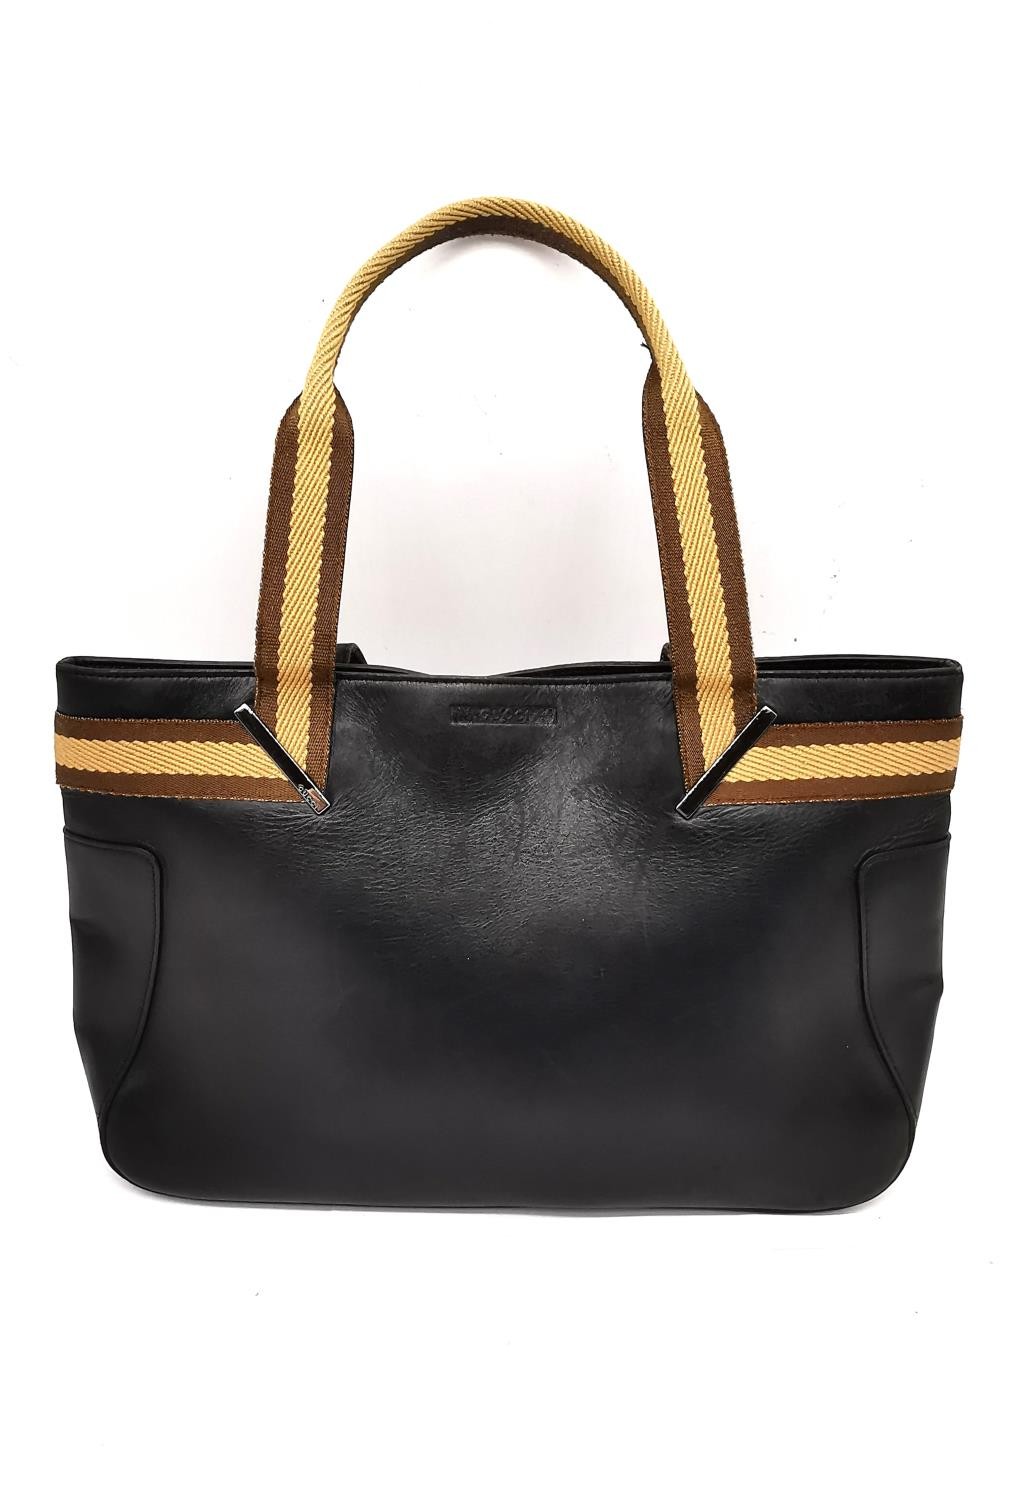 A Gucci Black web leather tote handbag with brown and beige strap. Magnetic snap closure and